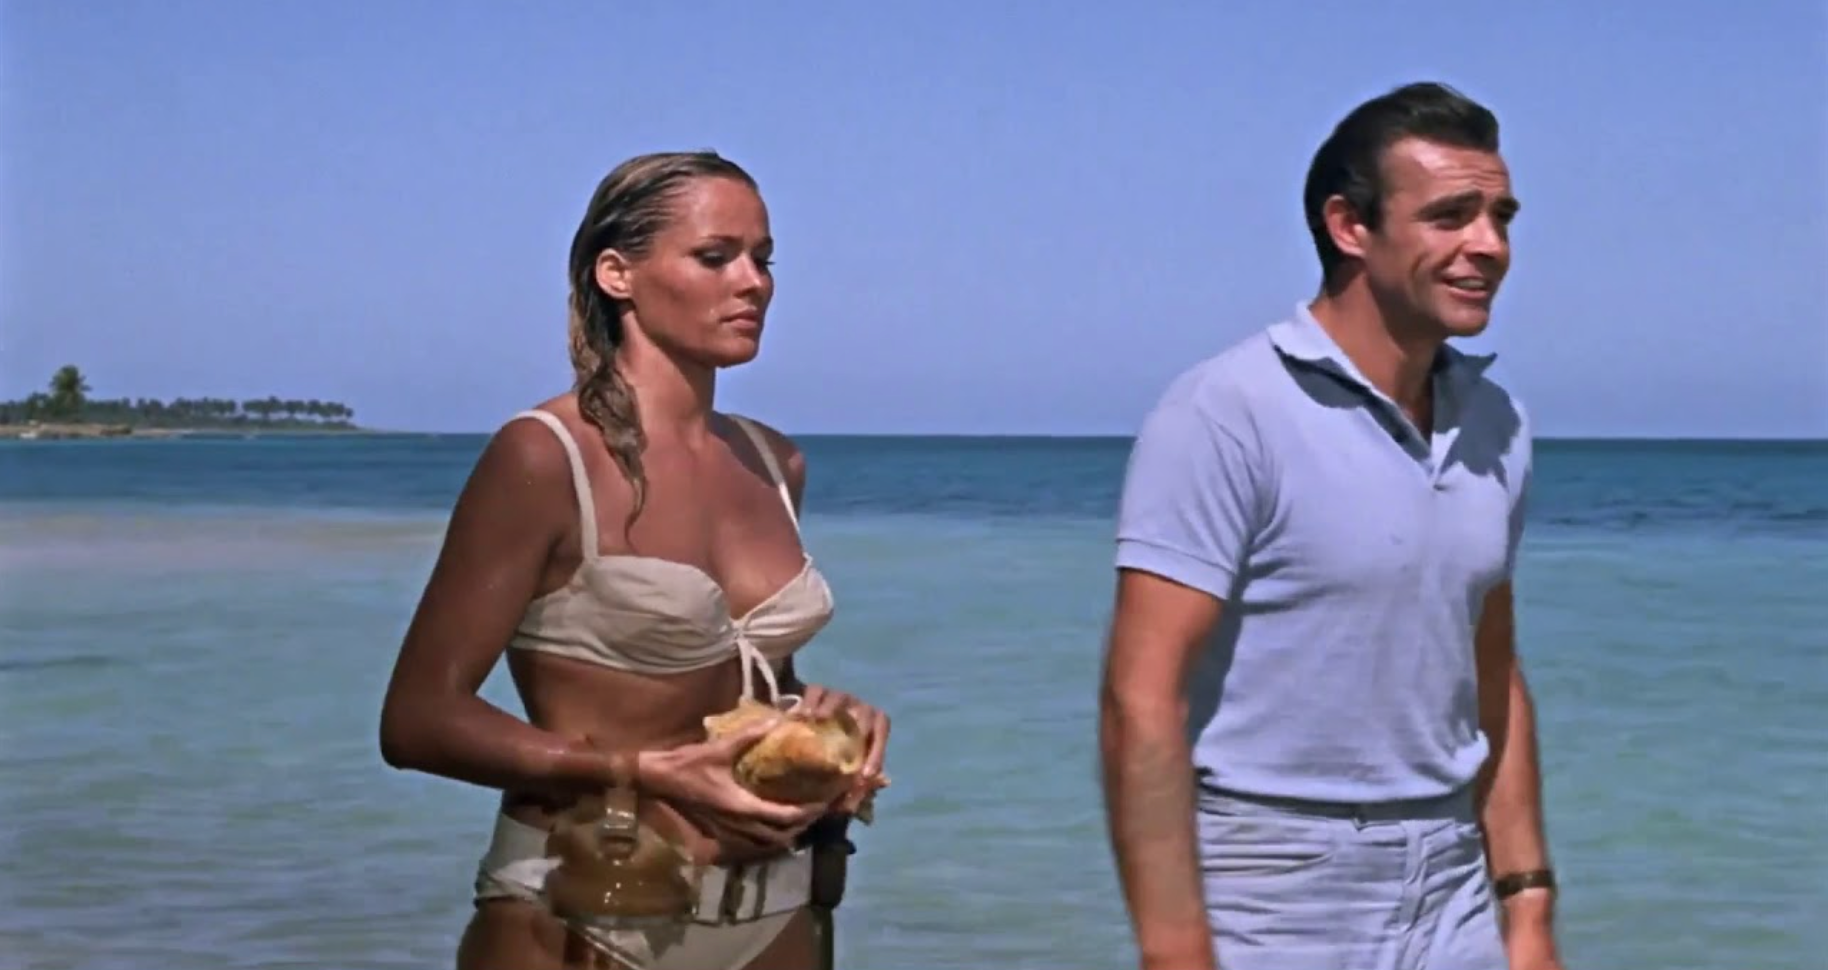 Dr. No on the beach